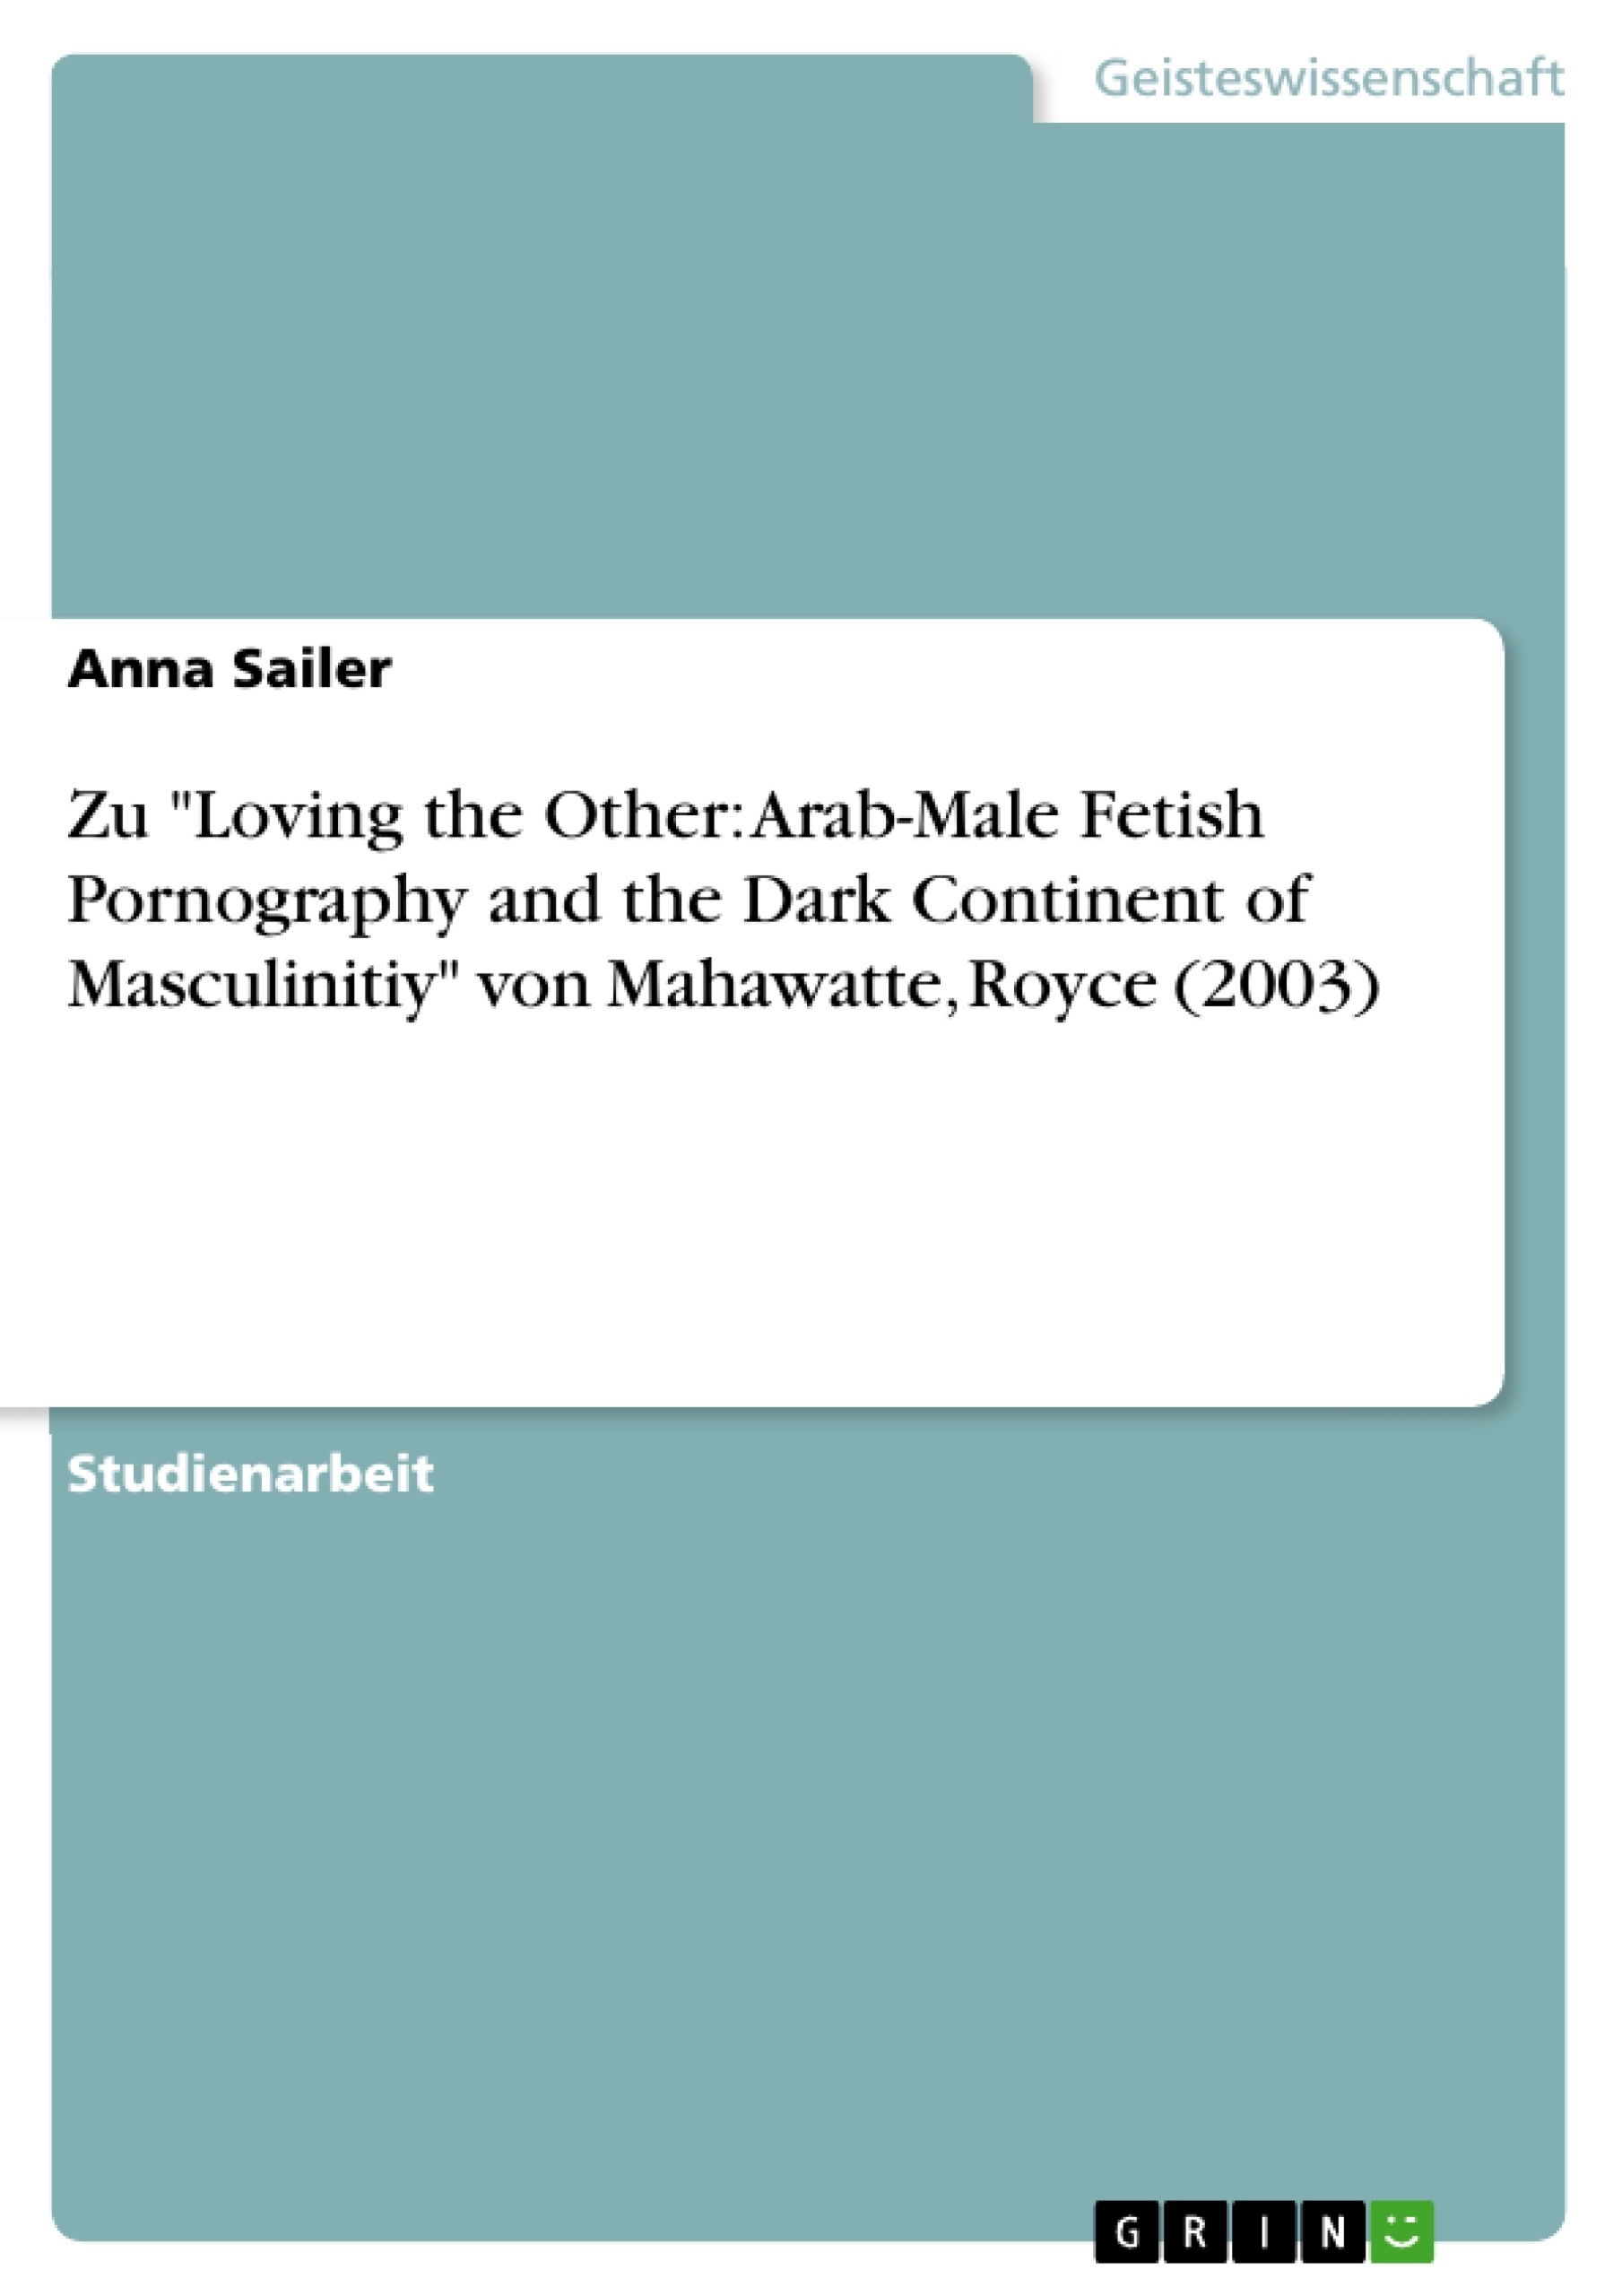 Titel: Zu "Loving the Other: Arab-Male Fetish Pornography and the Dark Continent of Masculinitiy" von Mahawatte, Royce (2003)